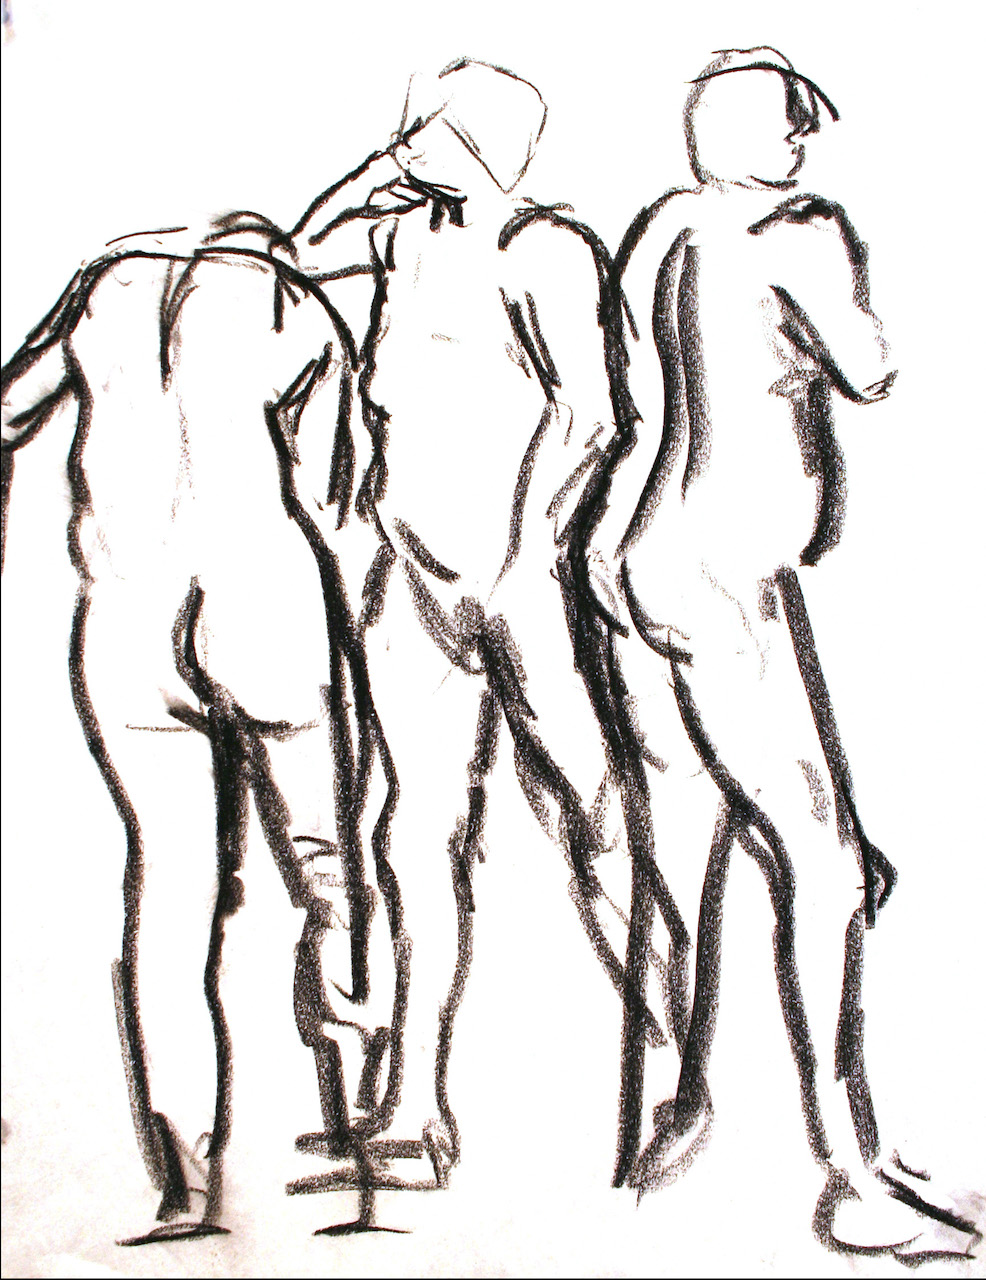 Gesture drawing in charcoal